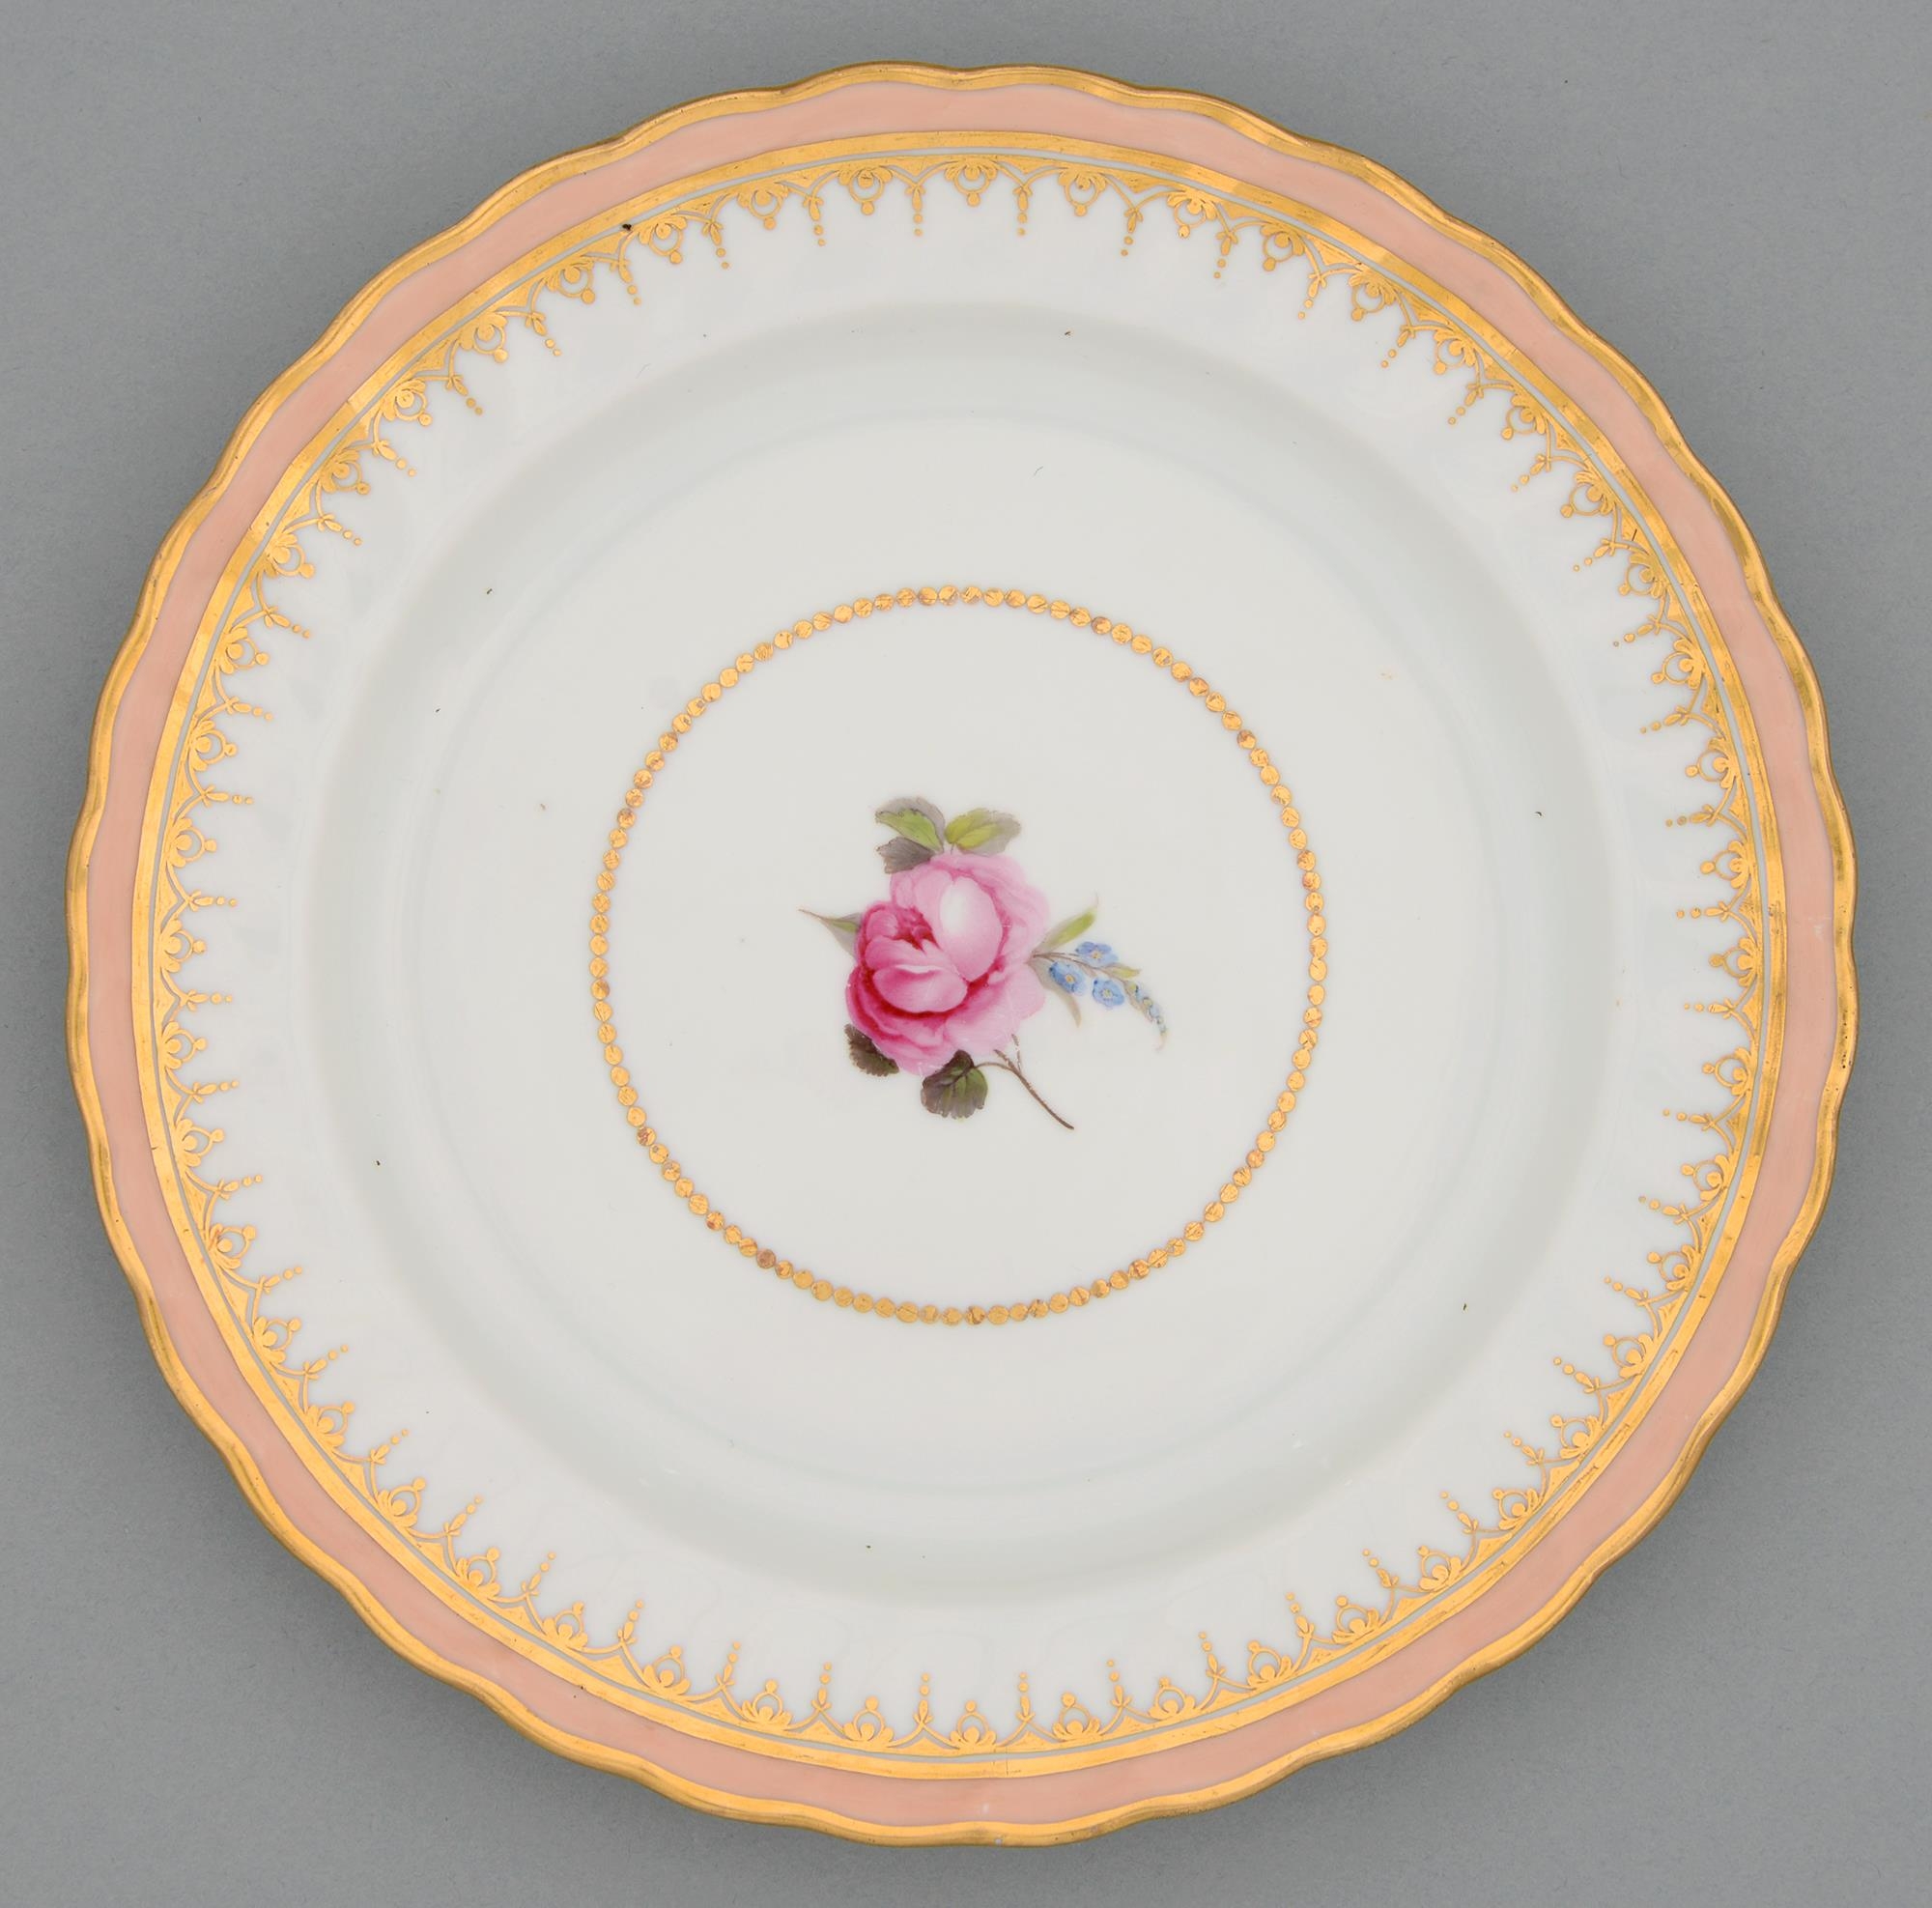 A Derby plate, c1790, painted by William Billingsley with a central rose in fluted salmon pink and